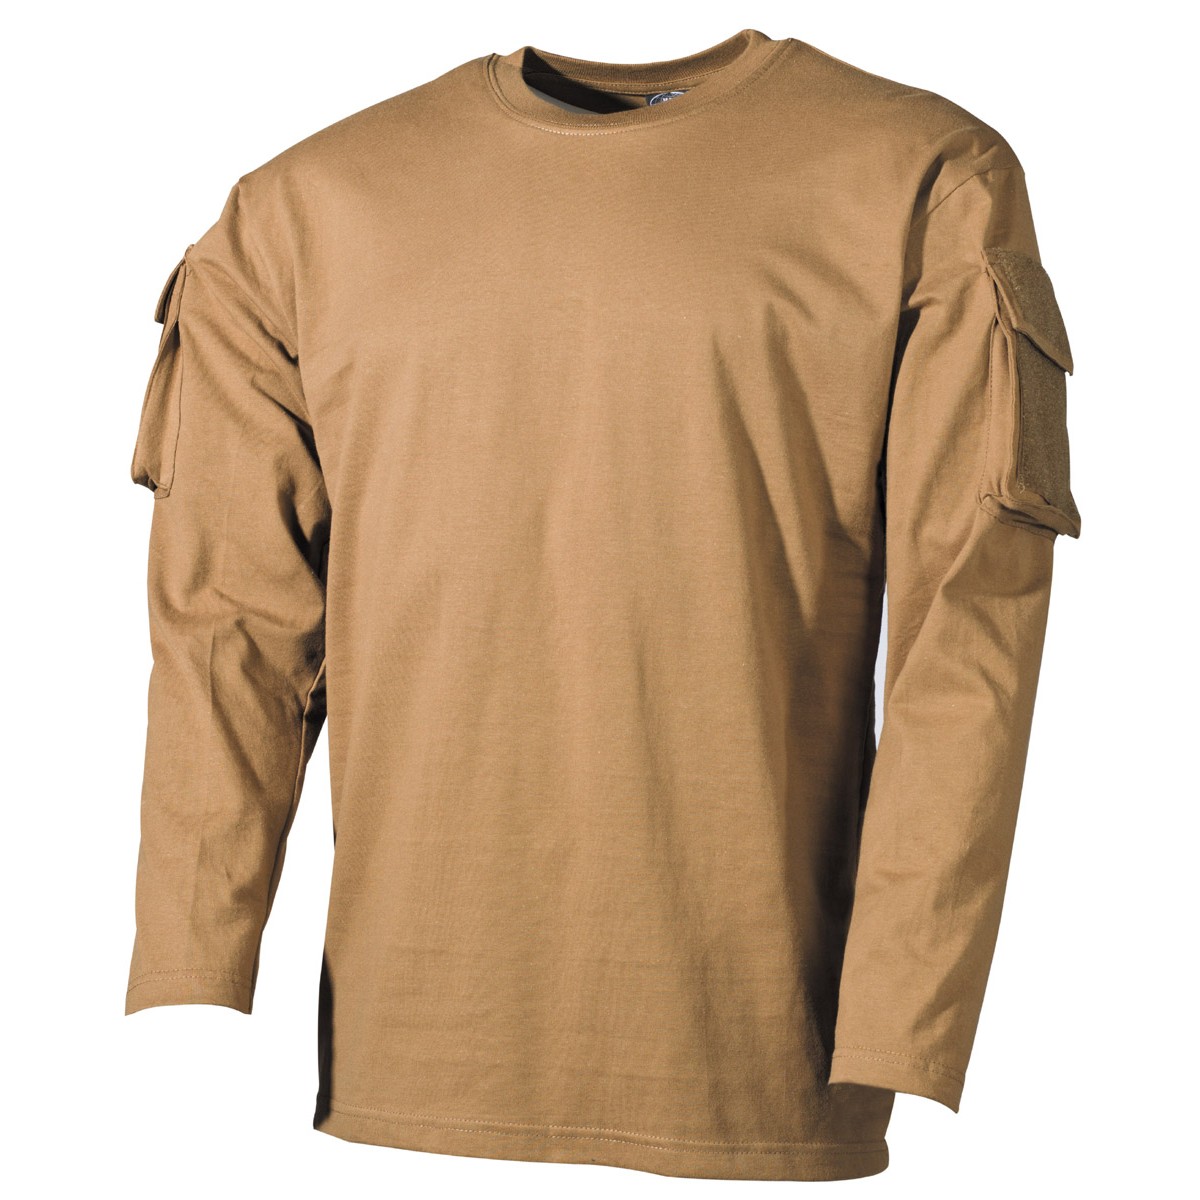 Tactical Military Army Special Ops Combat T-Shirt - Coyote - Long Sleeve